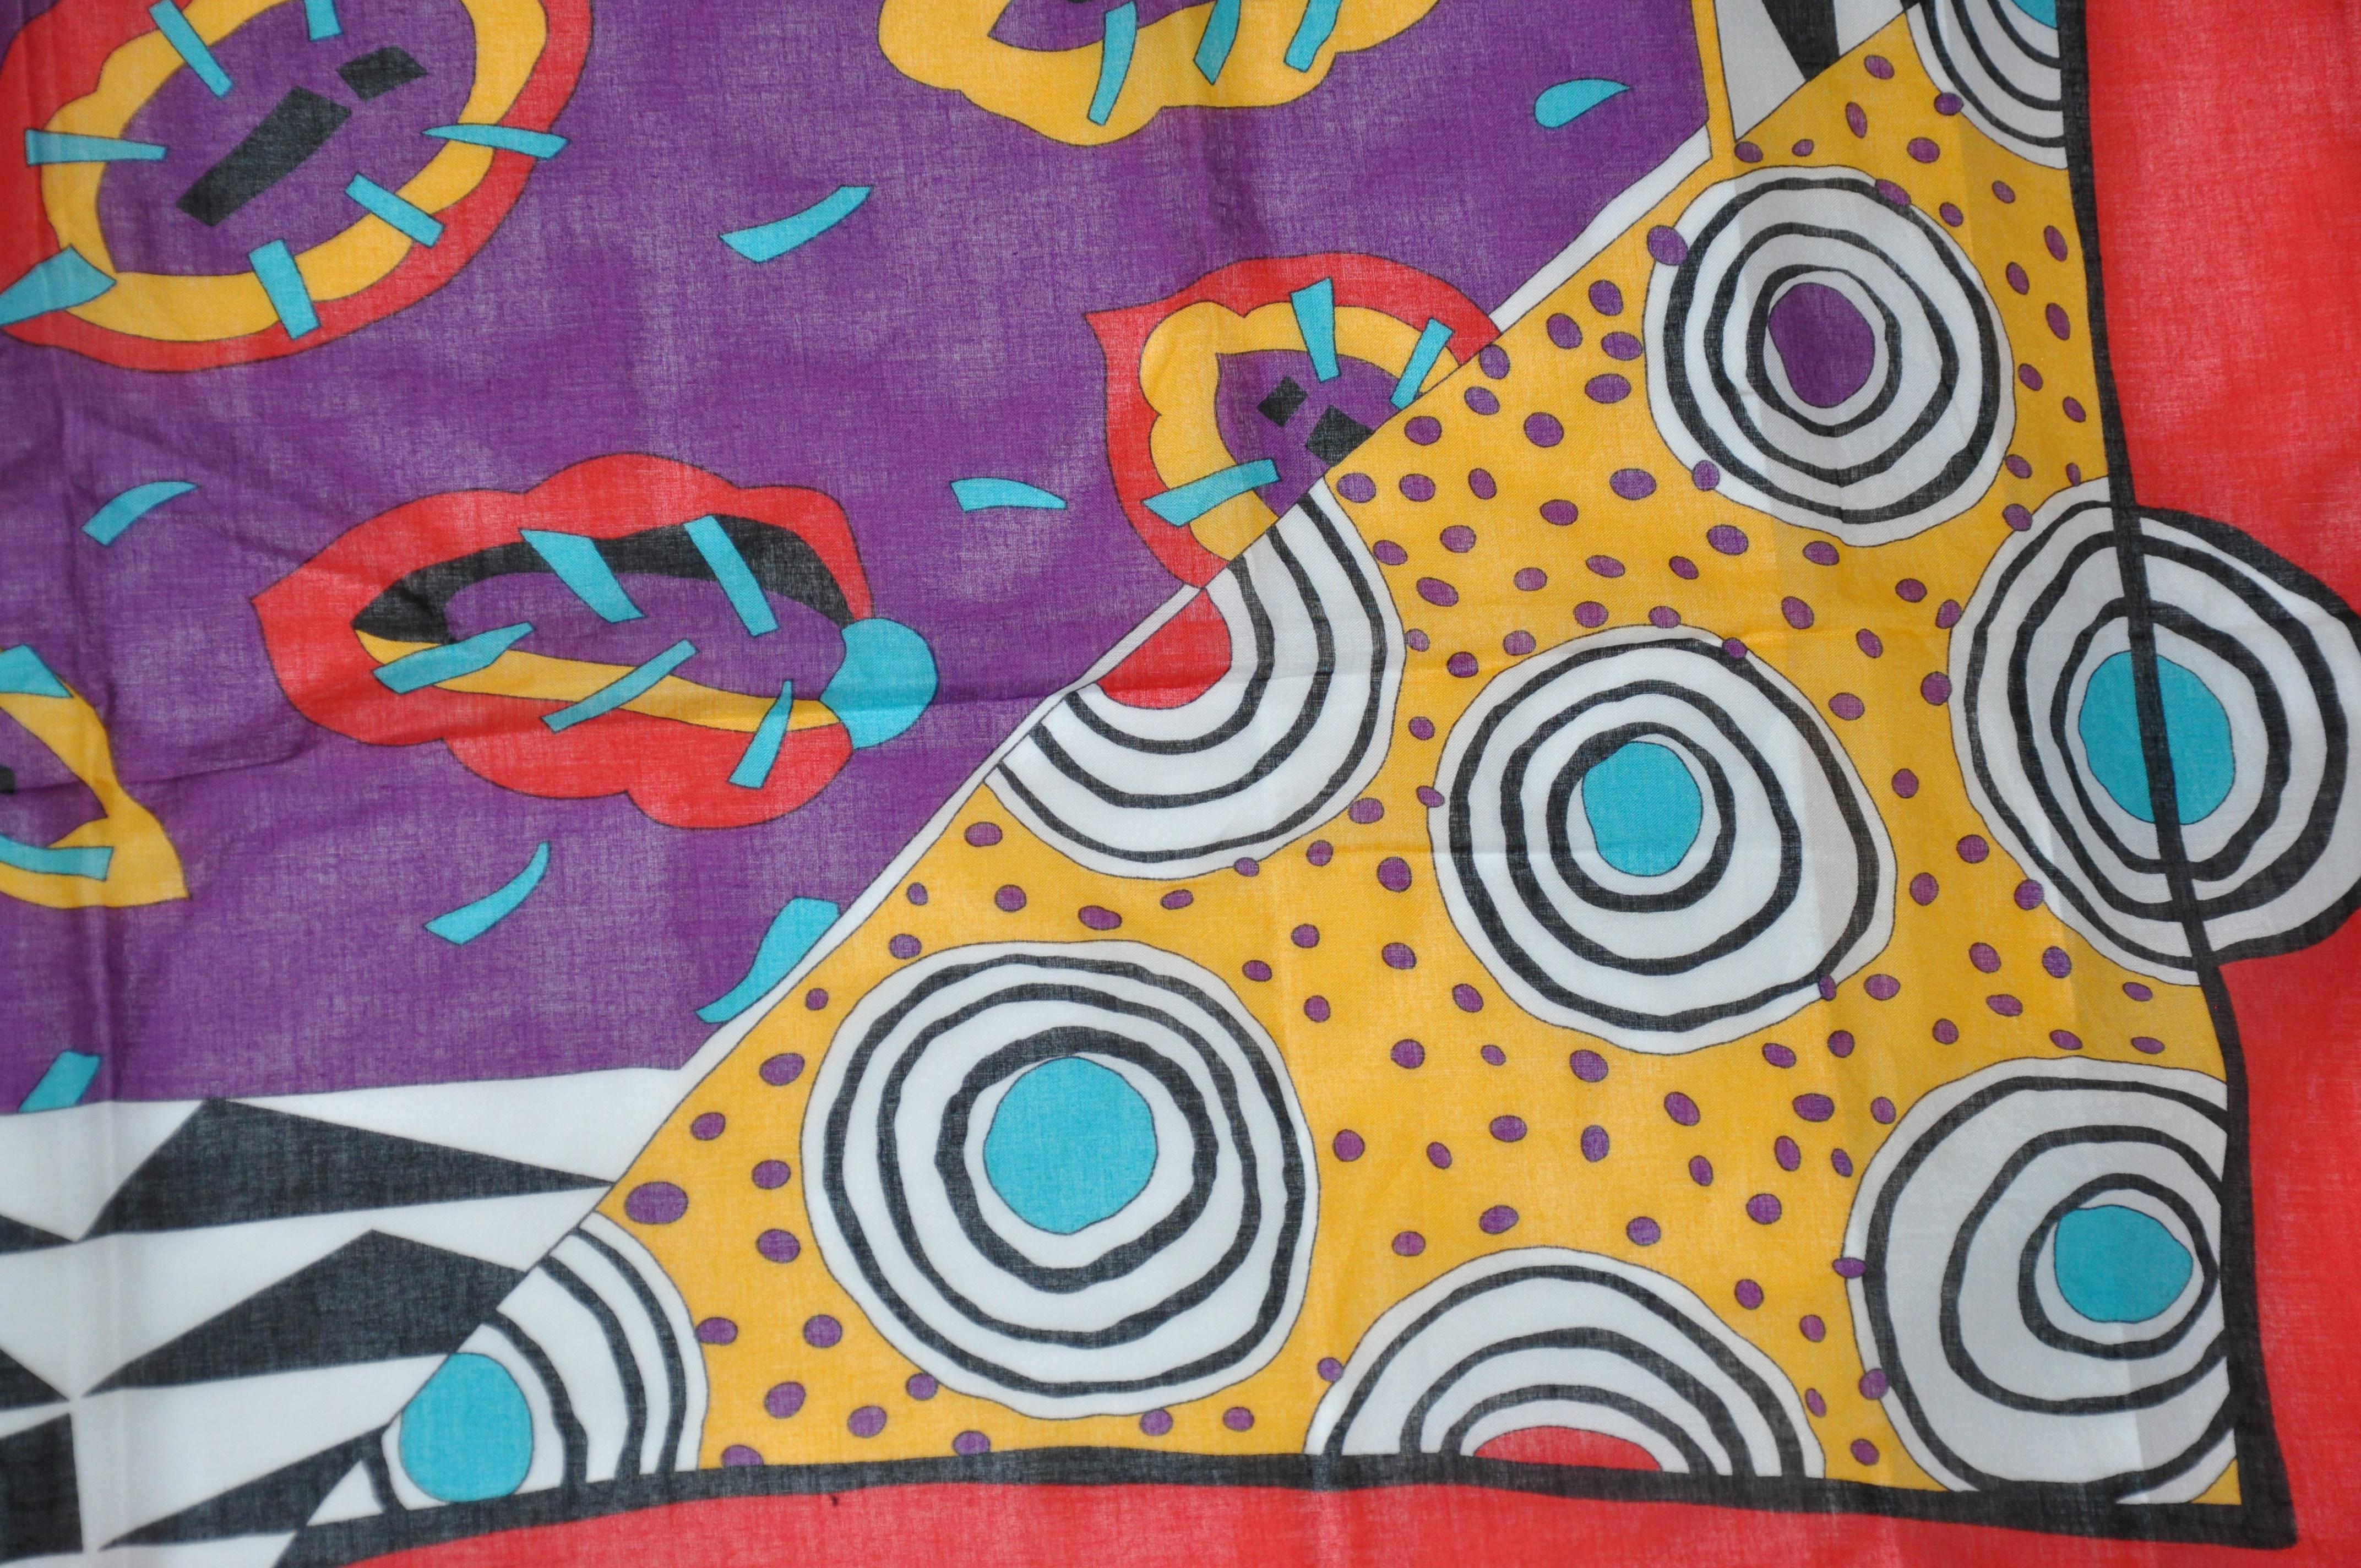      Ginnie Johansen wonderfully colorful & whimsical cotton scarf, measures 32 inches by 33 inches. Rolled edges, and made in Japan.